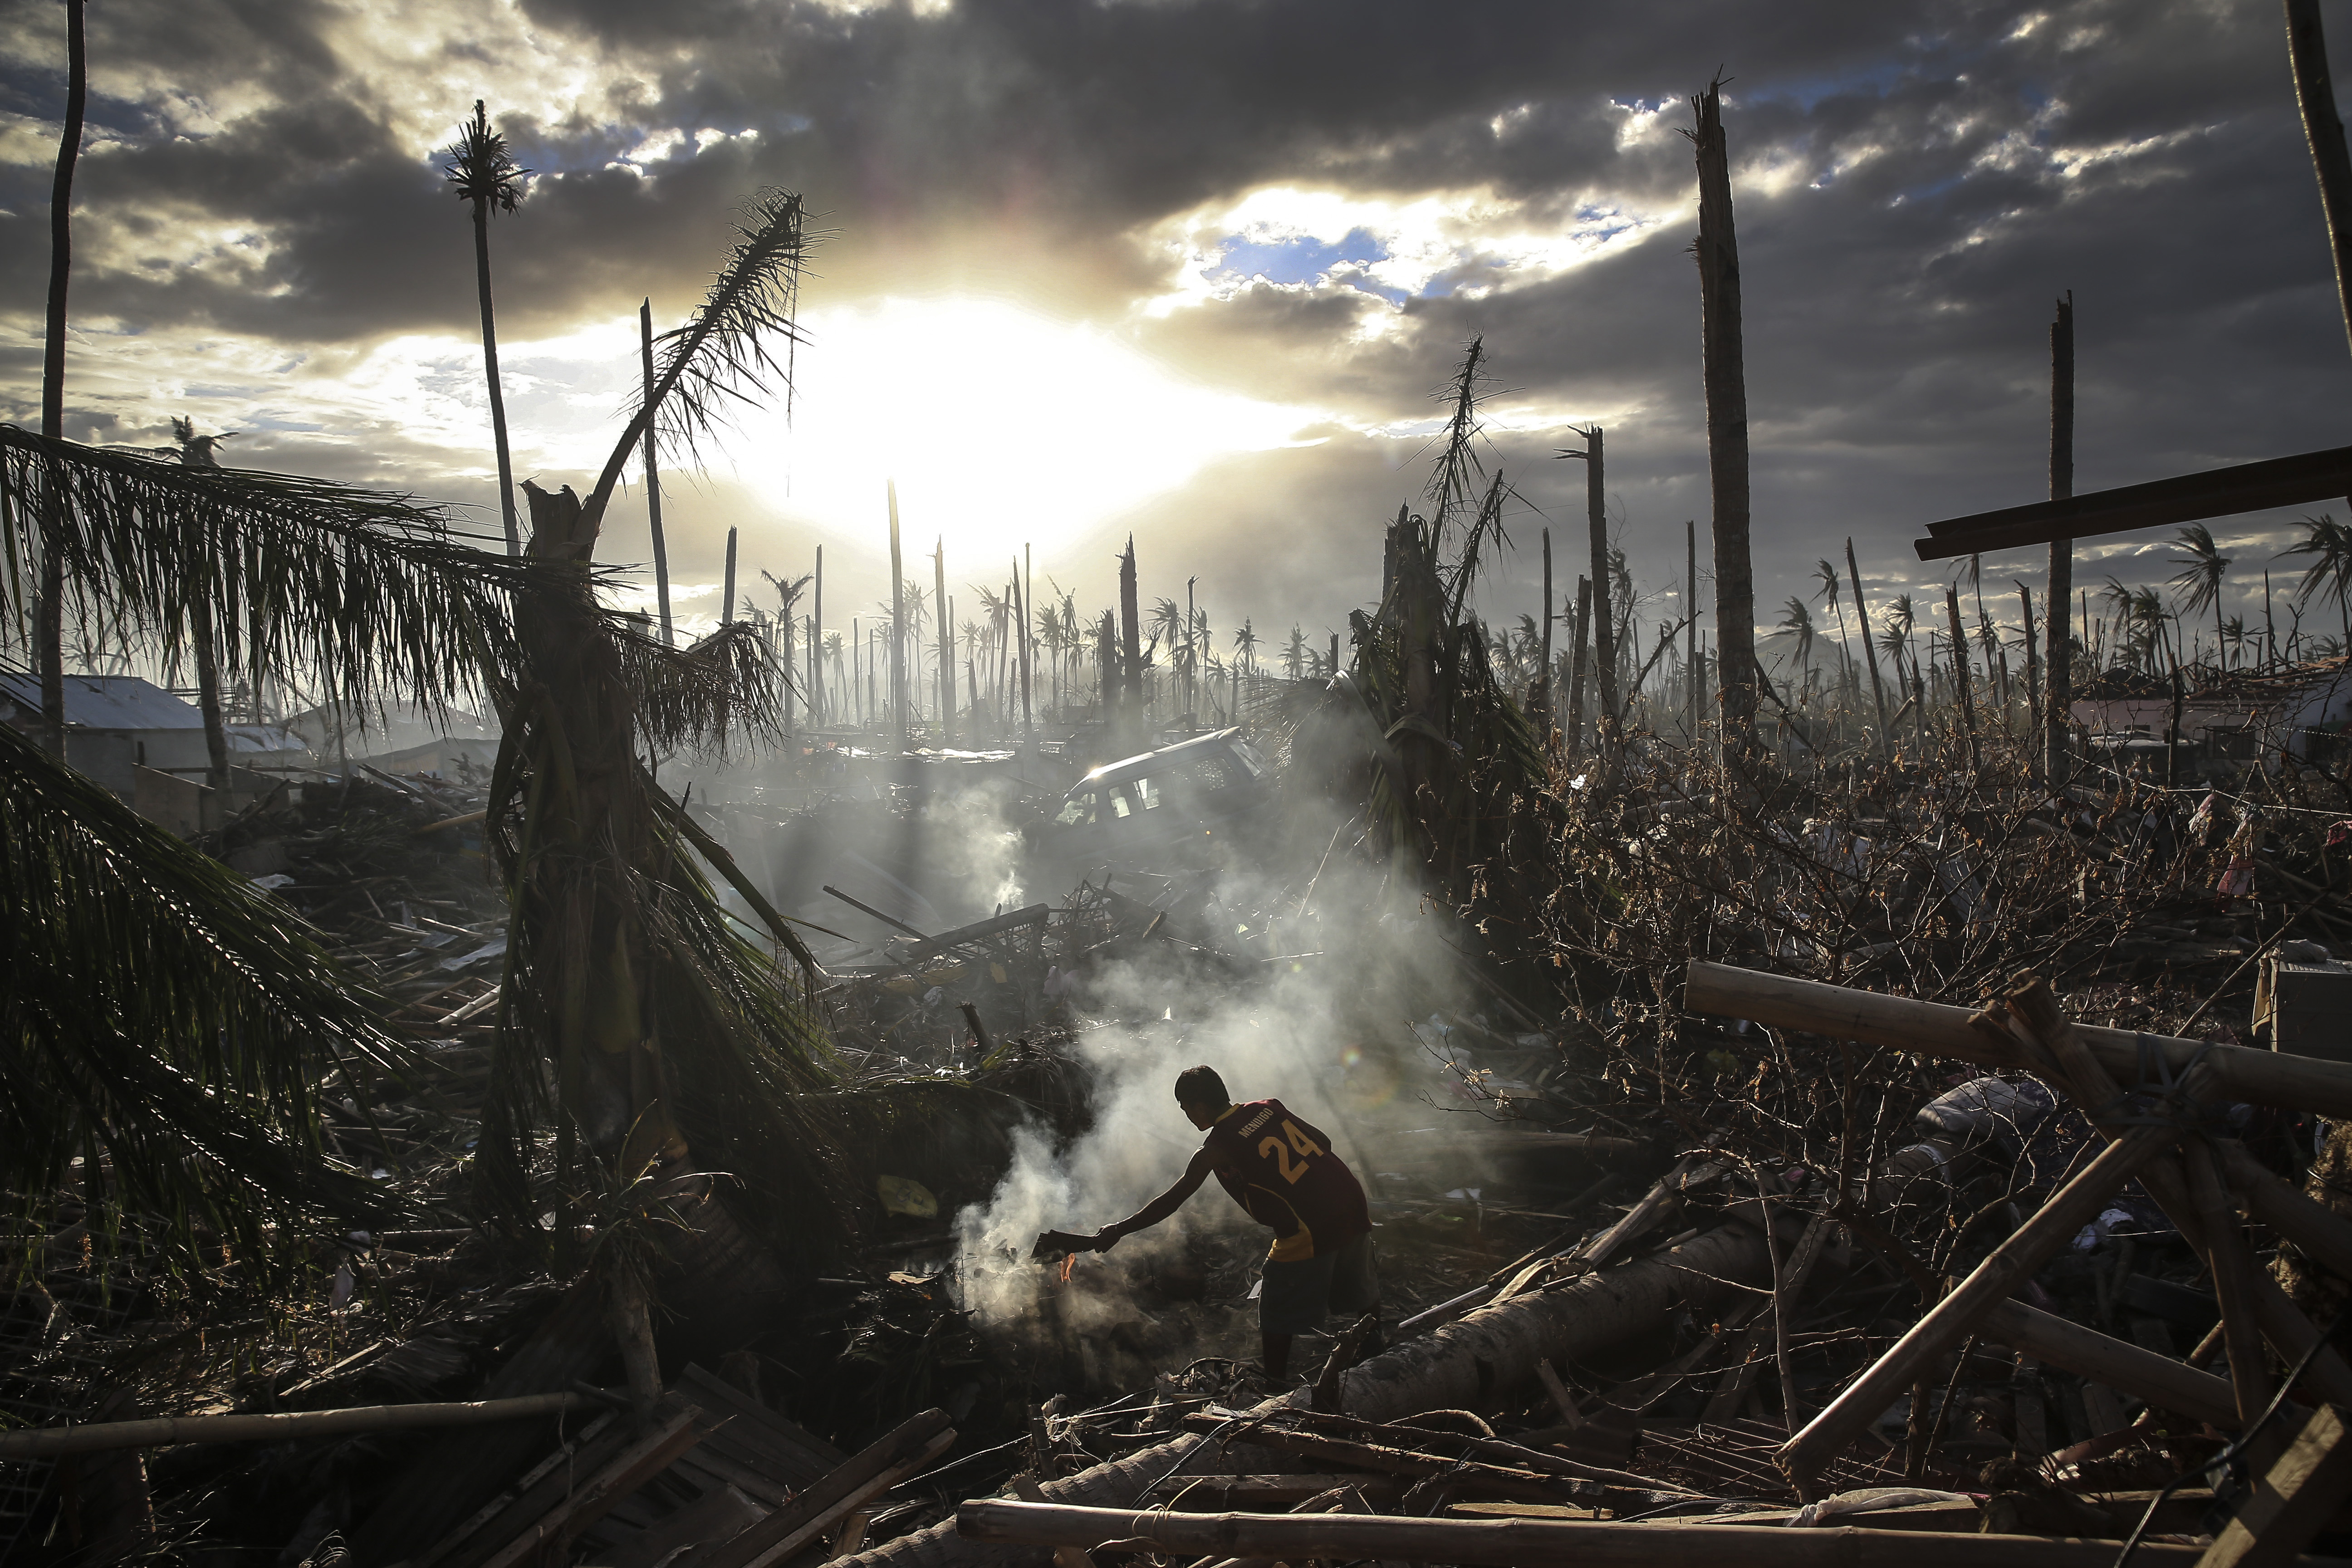 Nominated in the Current Affairs category. Dan Kitwood's work from the Philippines during Typhoon Haiyan. Pictured: A man fans flames on a fire in Tanauan, Philippines on Nov. 19, 2013.